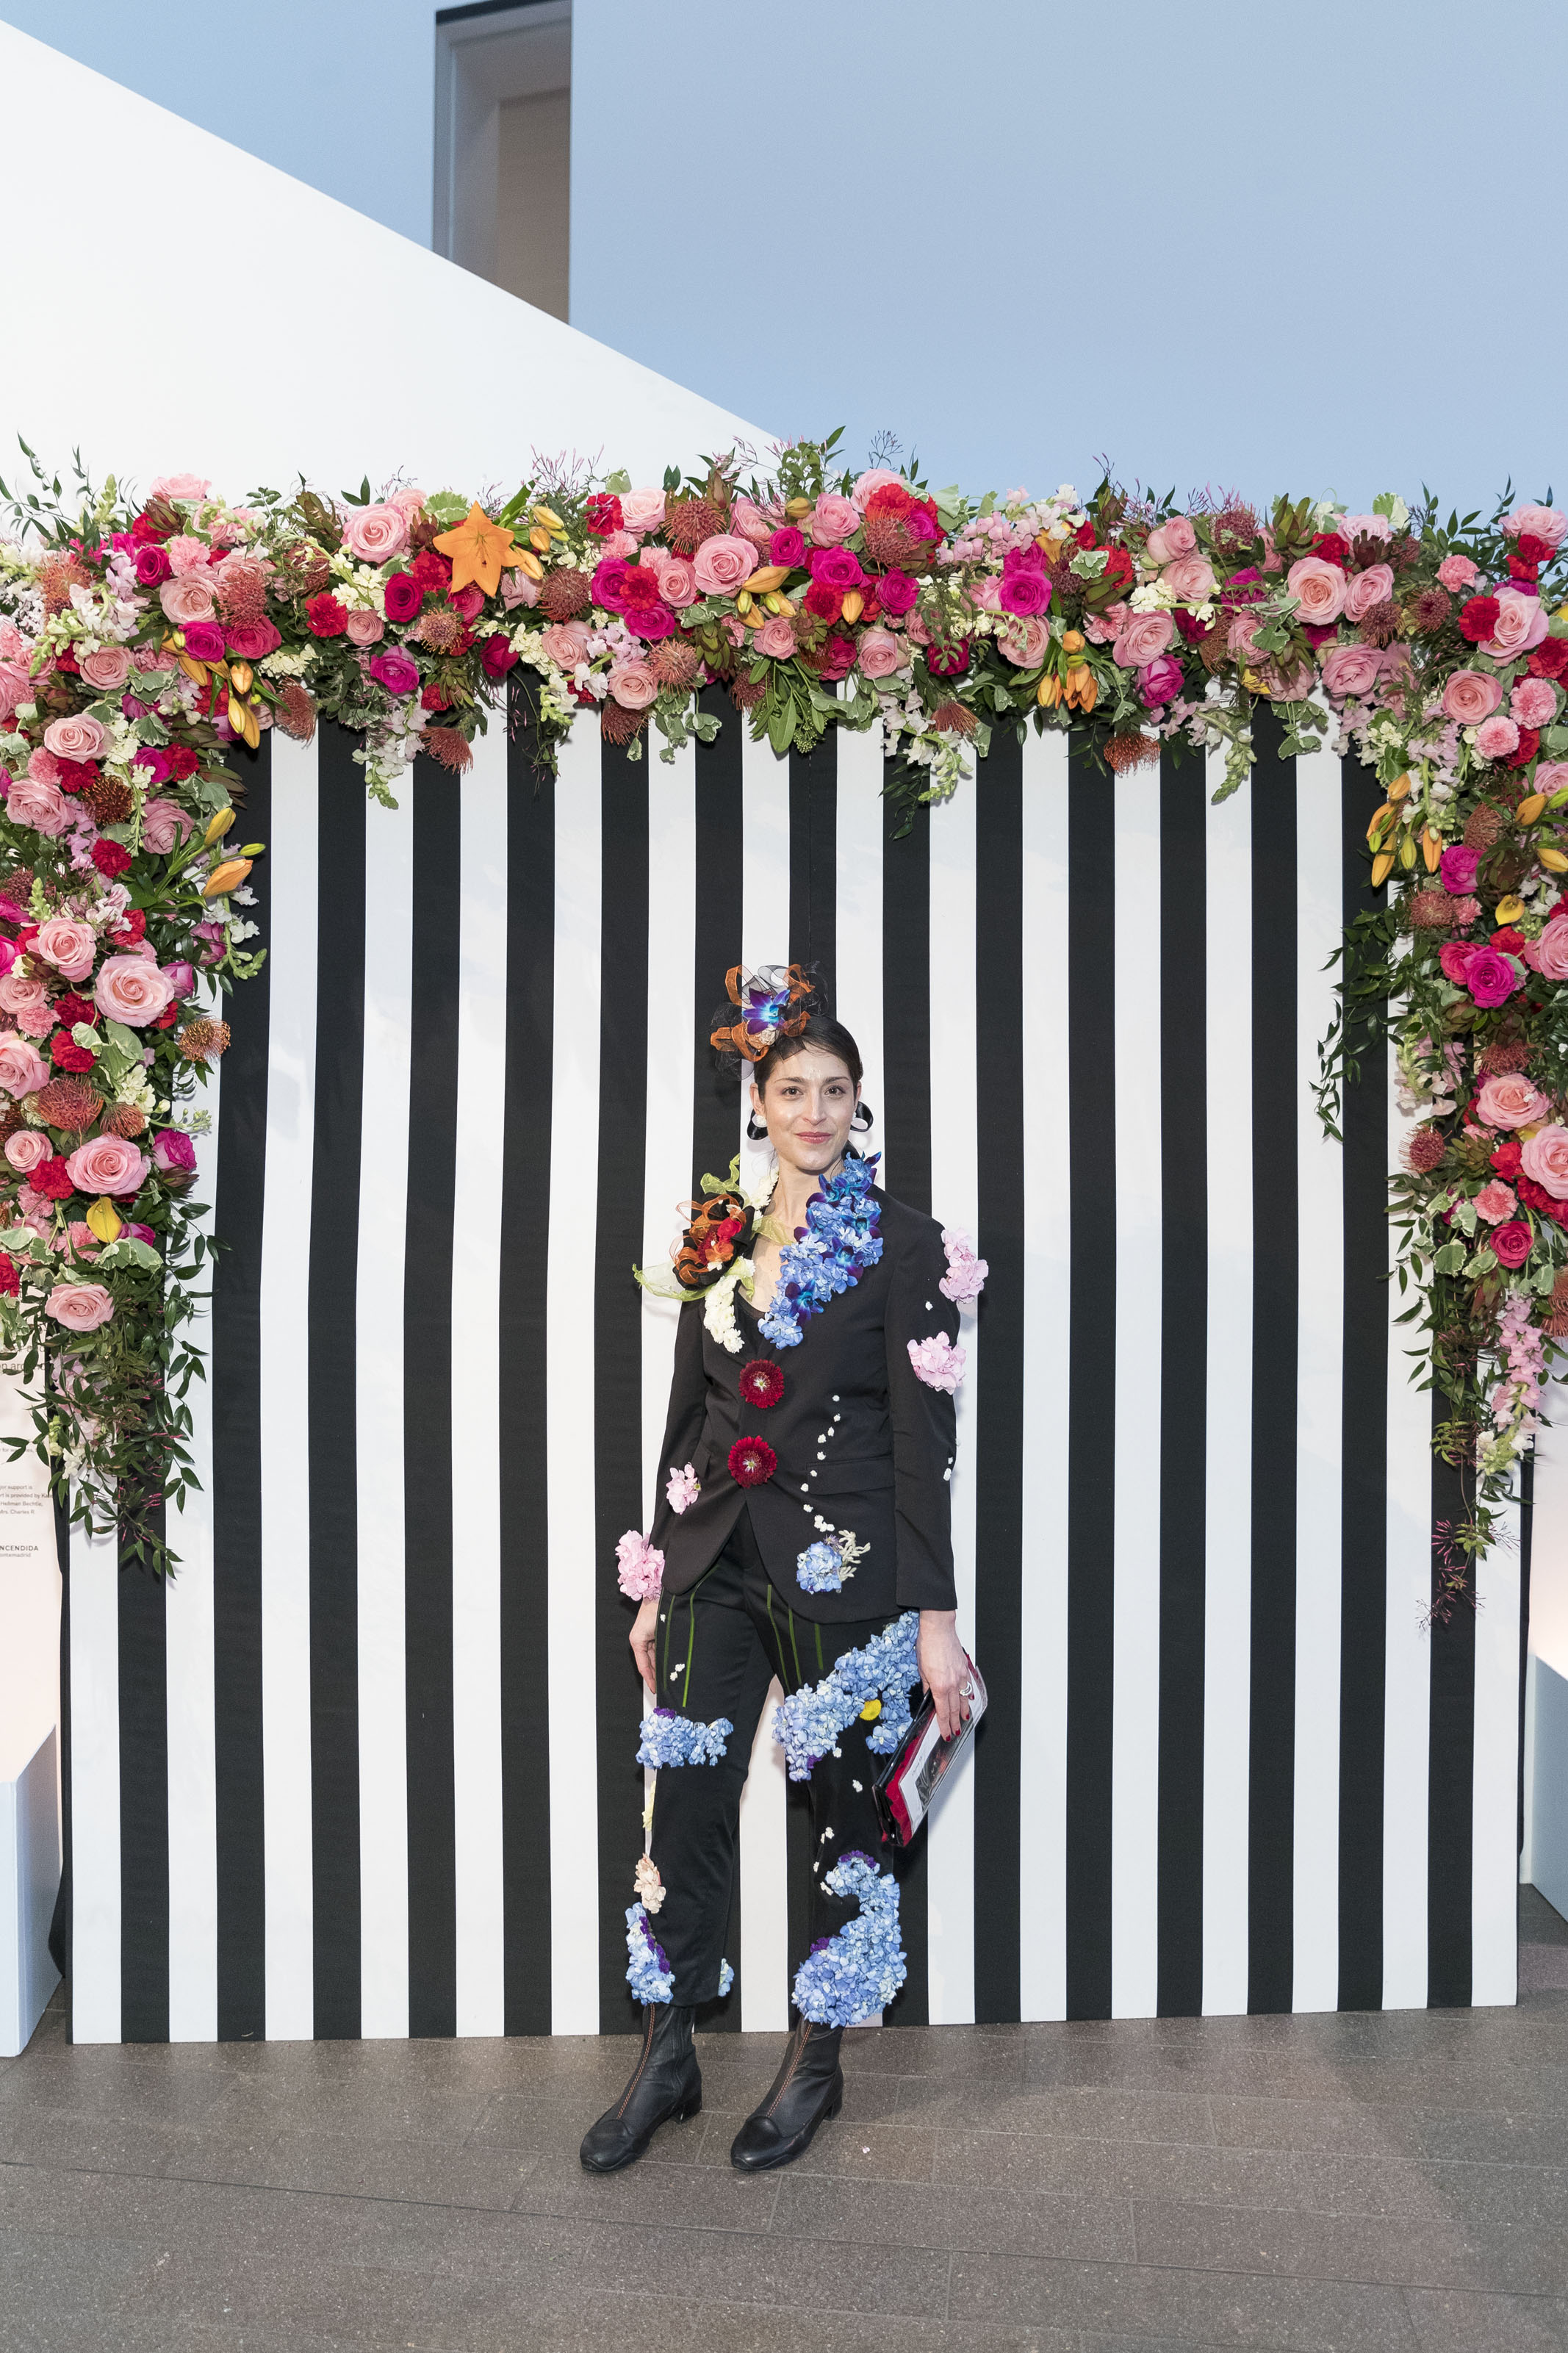 Shari Wilk created this floral pantsuit modeled by Betsey Herczeg-Konecney at the Bouquets to Art Gala on March 12, 2018 at de Young Museum in San Francisco, CA. Photo by Drew Altizer/Courtesy of the Fine Arts Museum of San Francisco. 